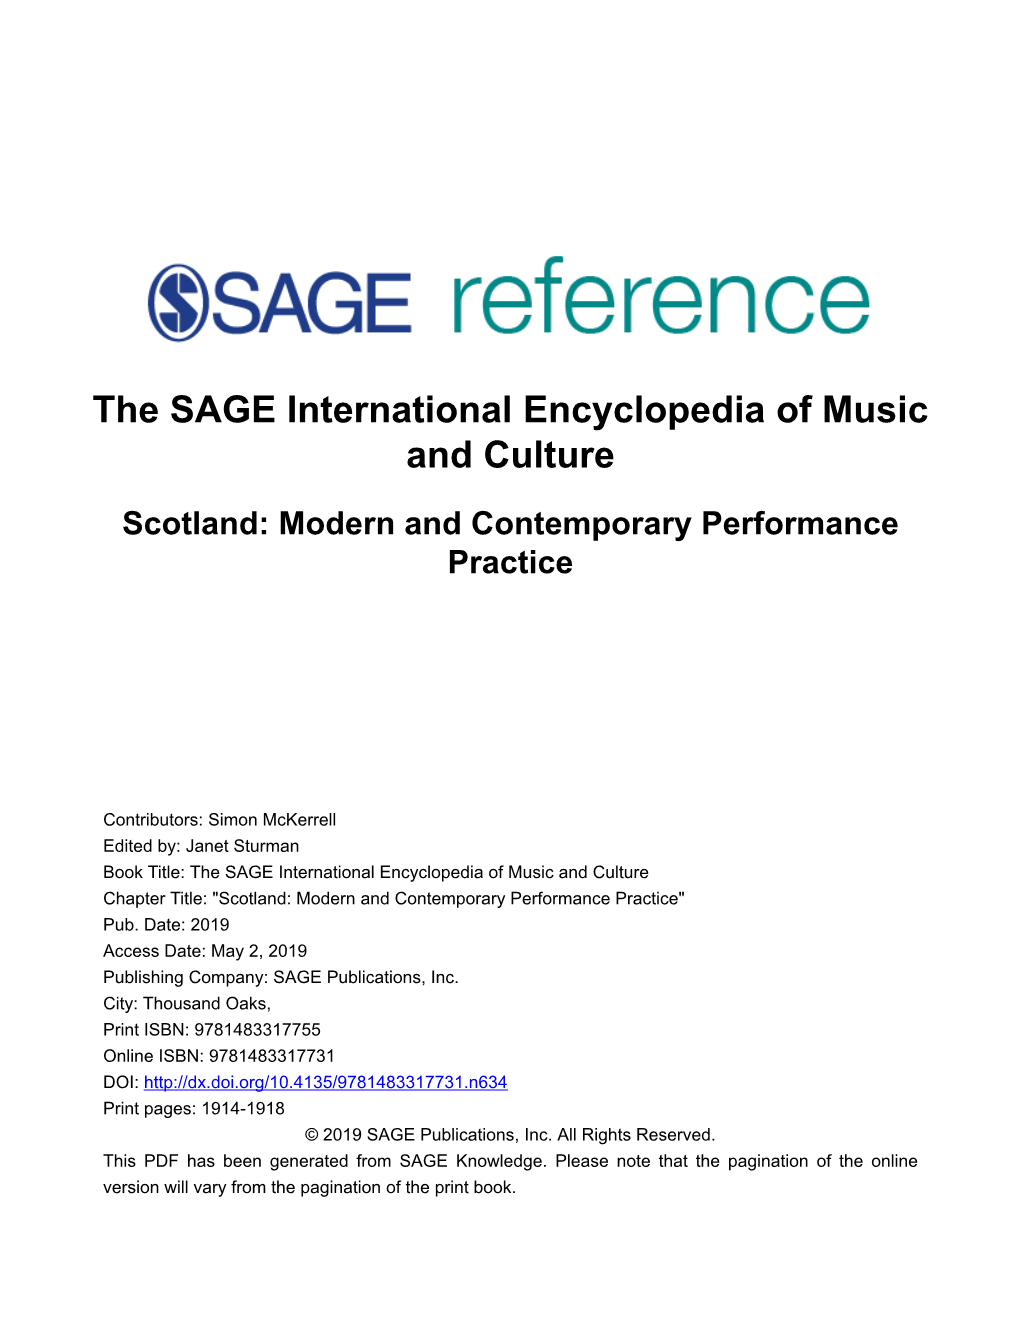 Scotland: Modern and Contemporary Performance Practice